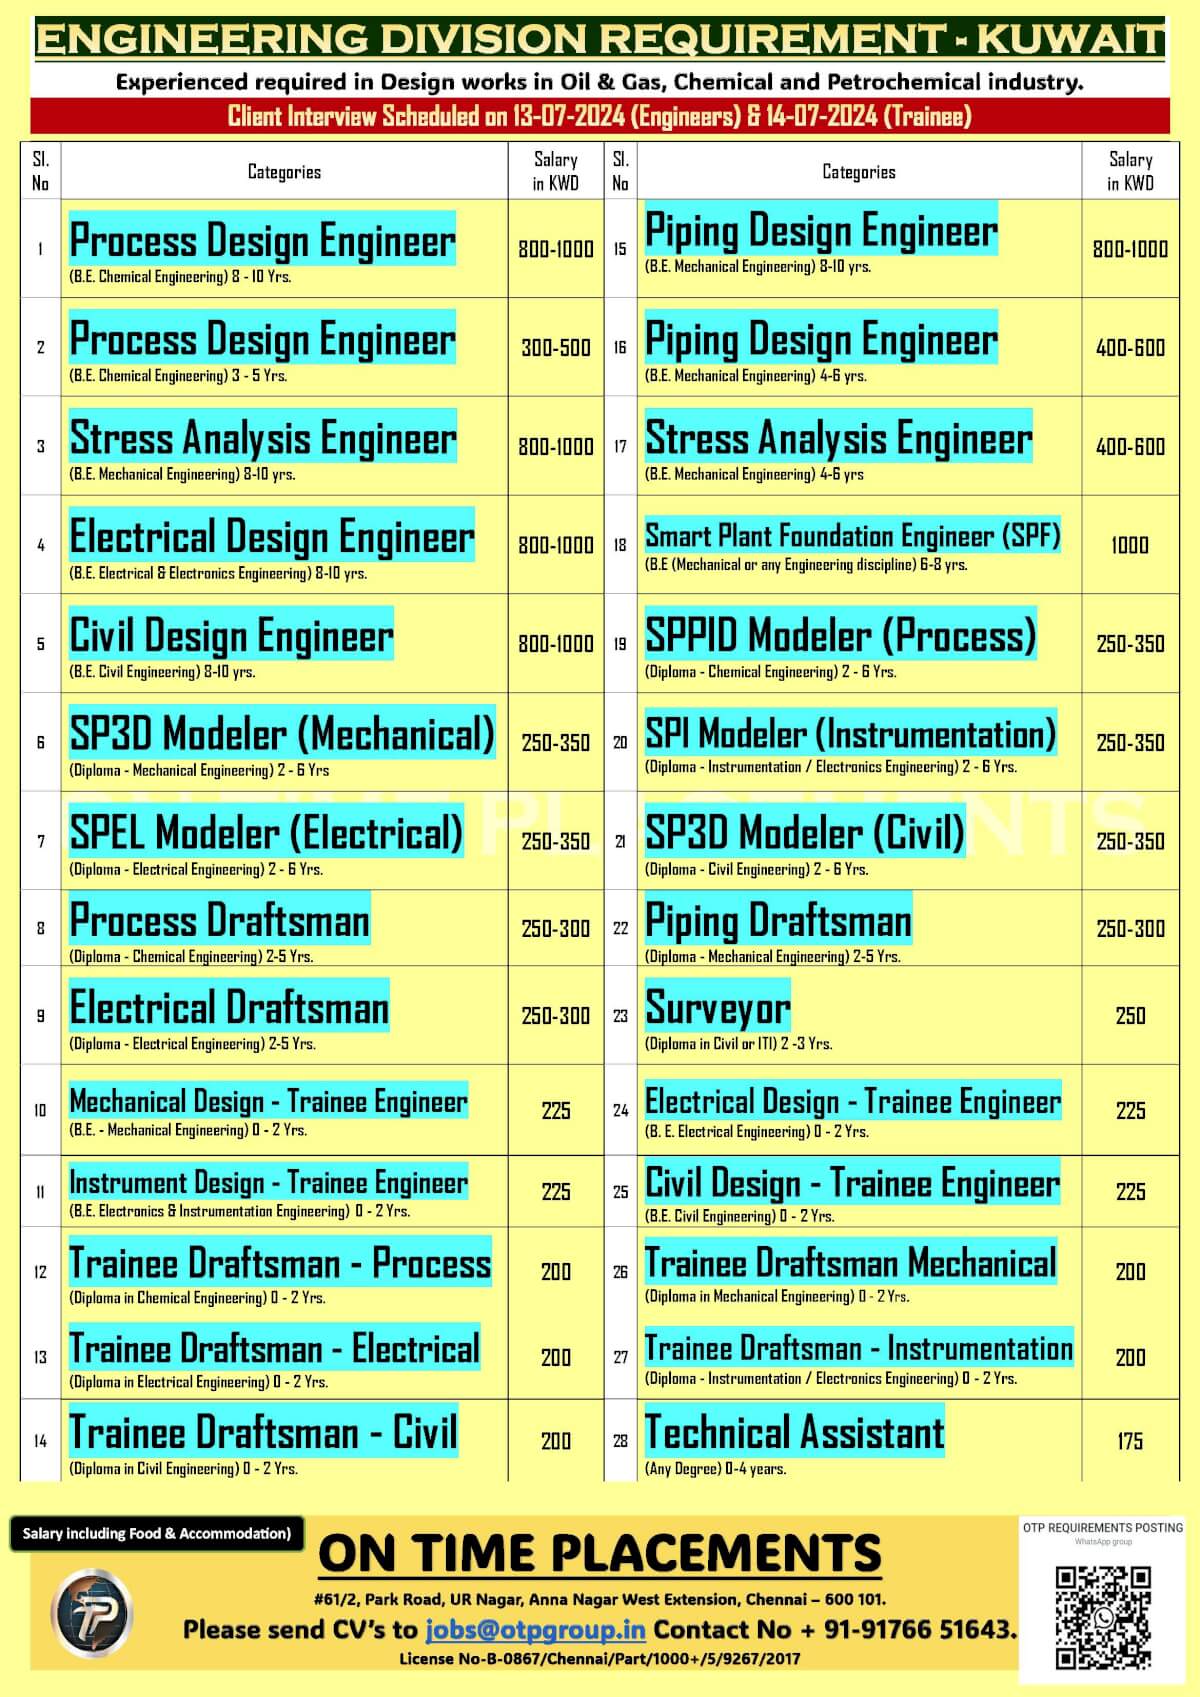 ENGINEERING DIVISION